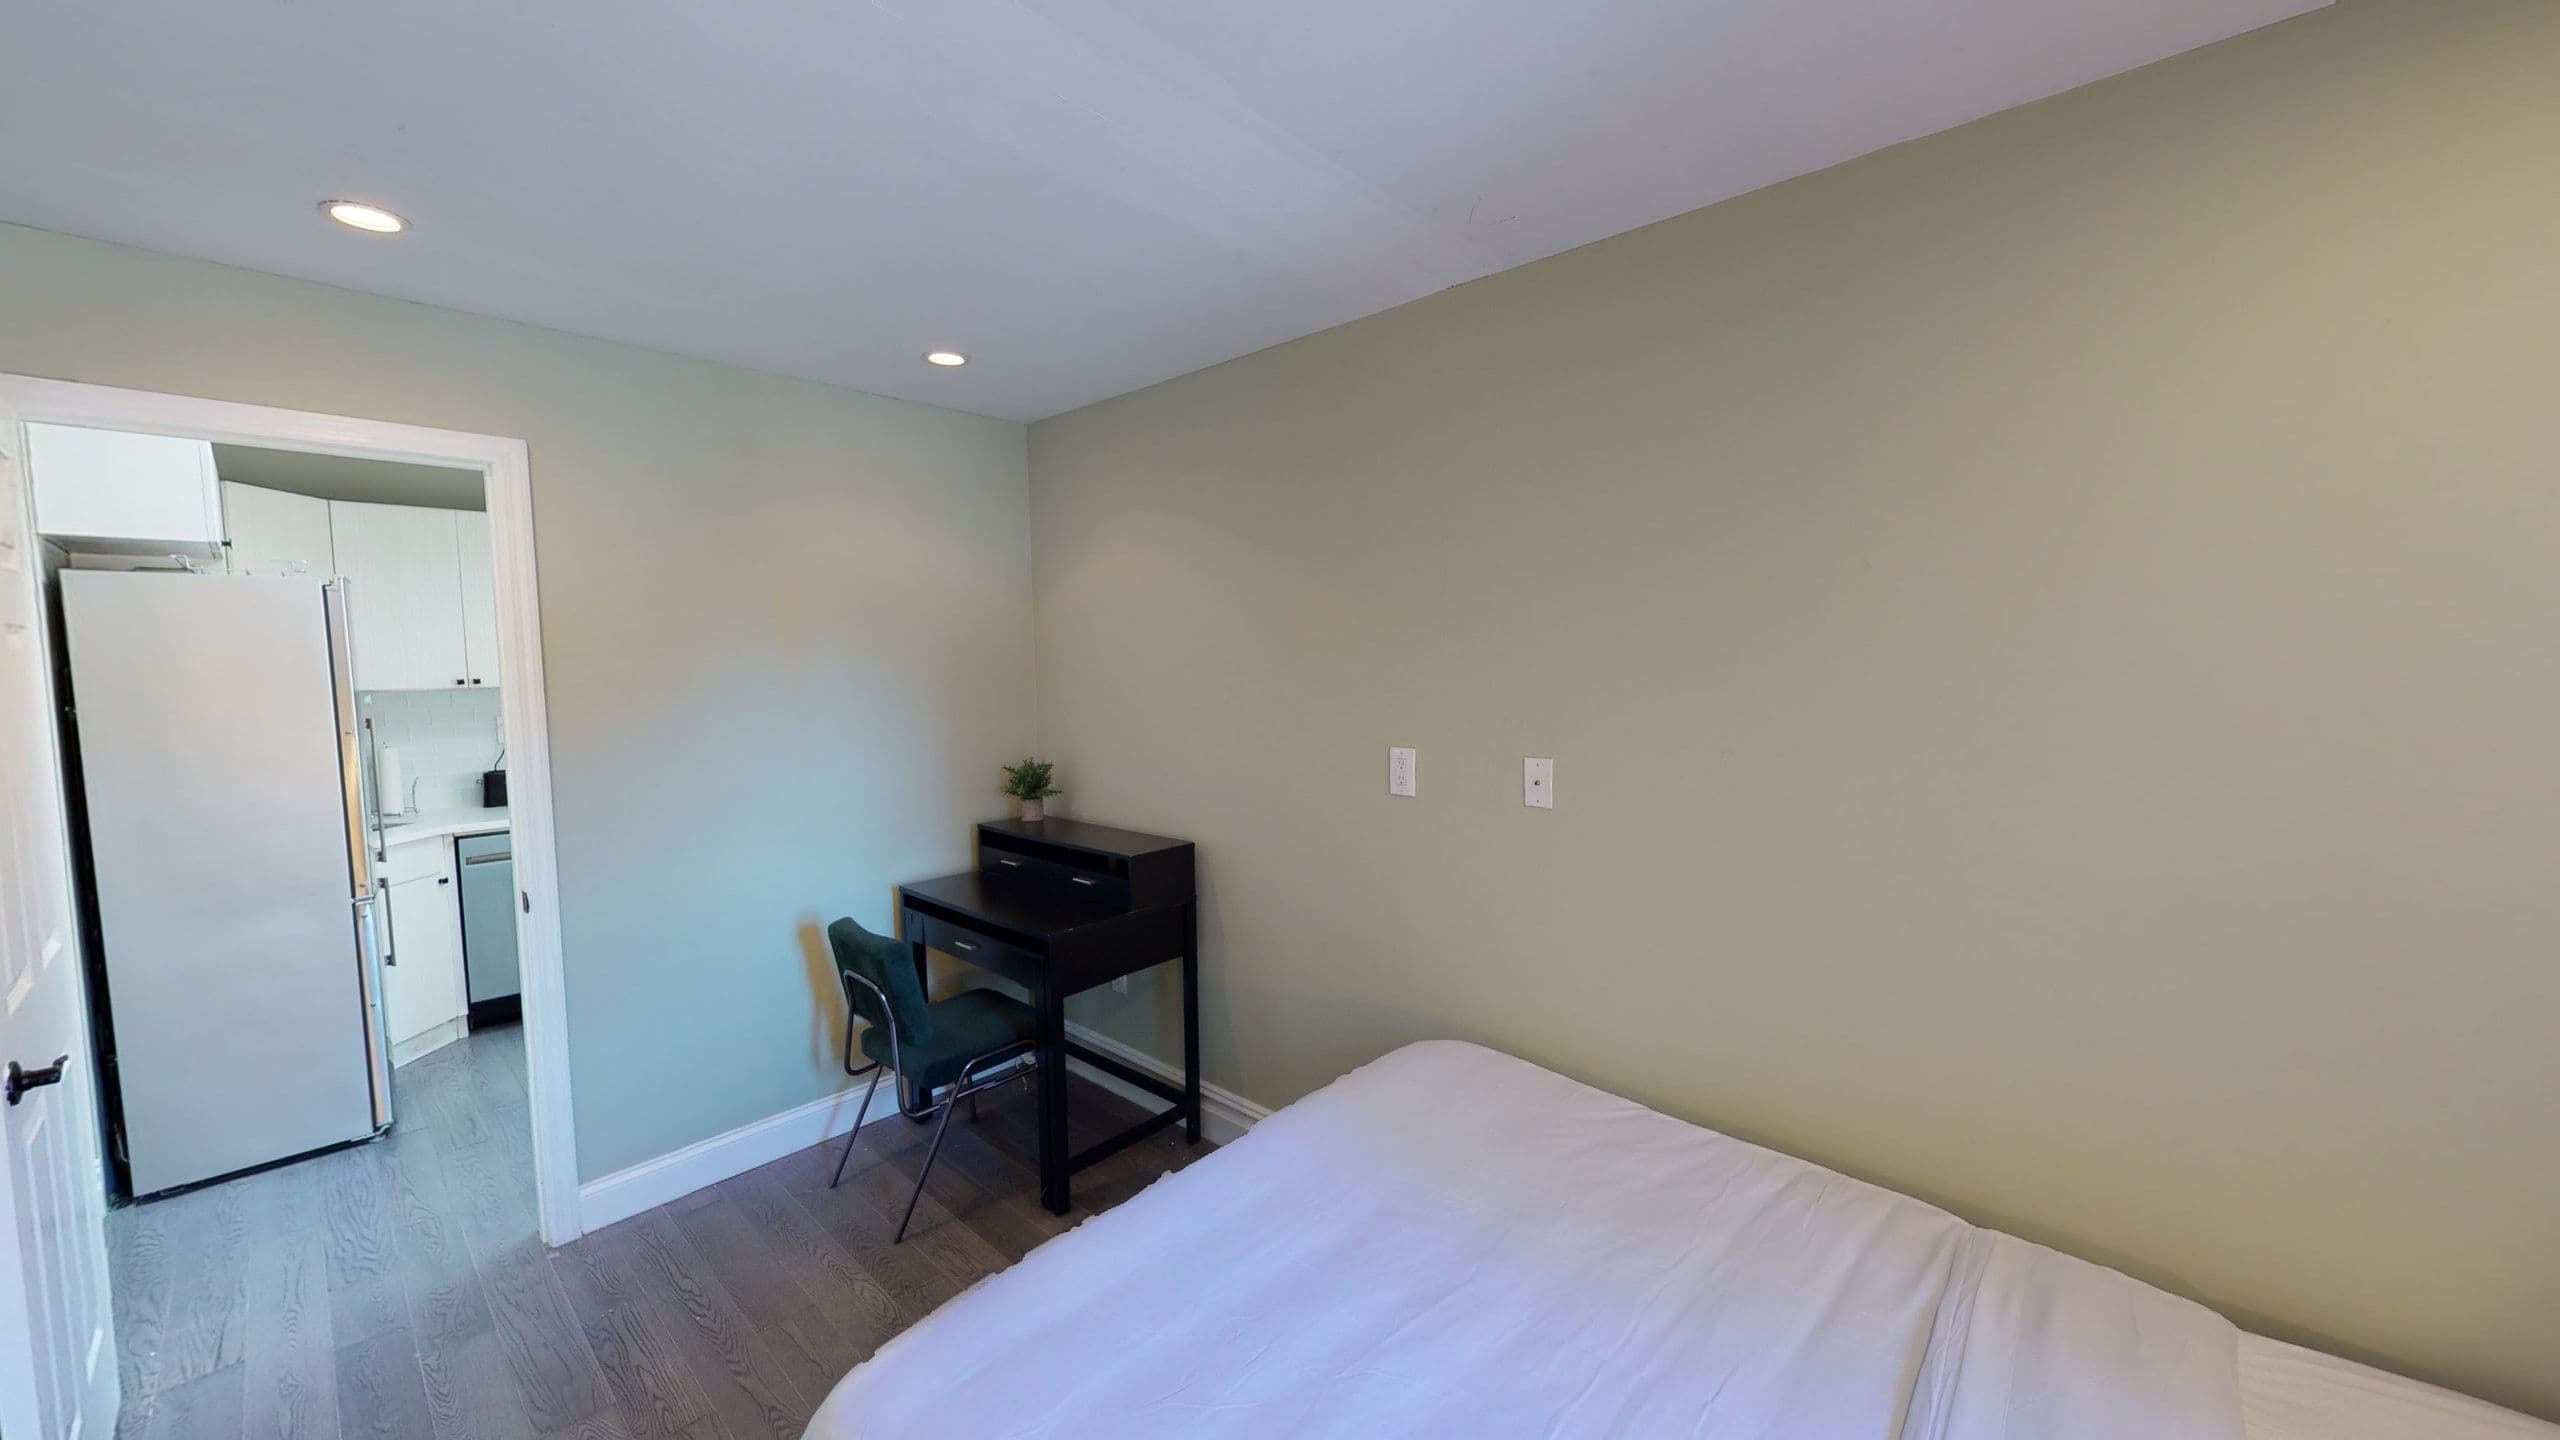 Photo 27 of #1530: Queen Bedroom A at June Homes